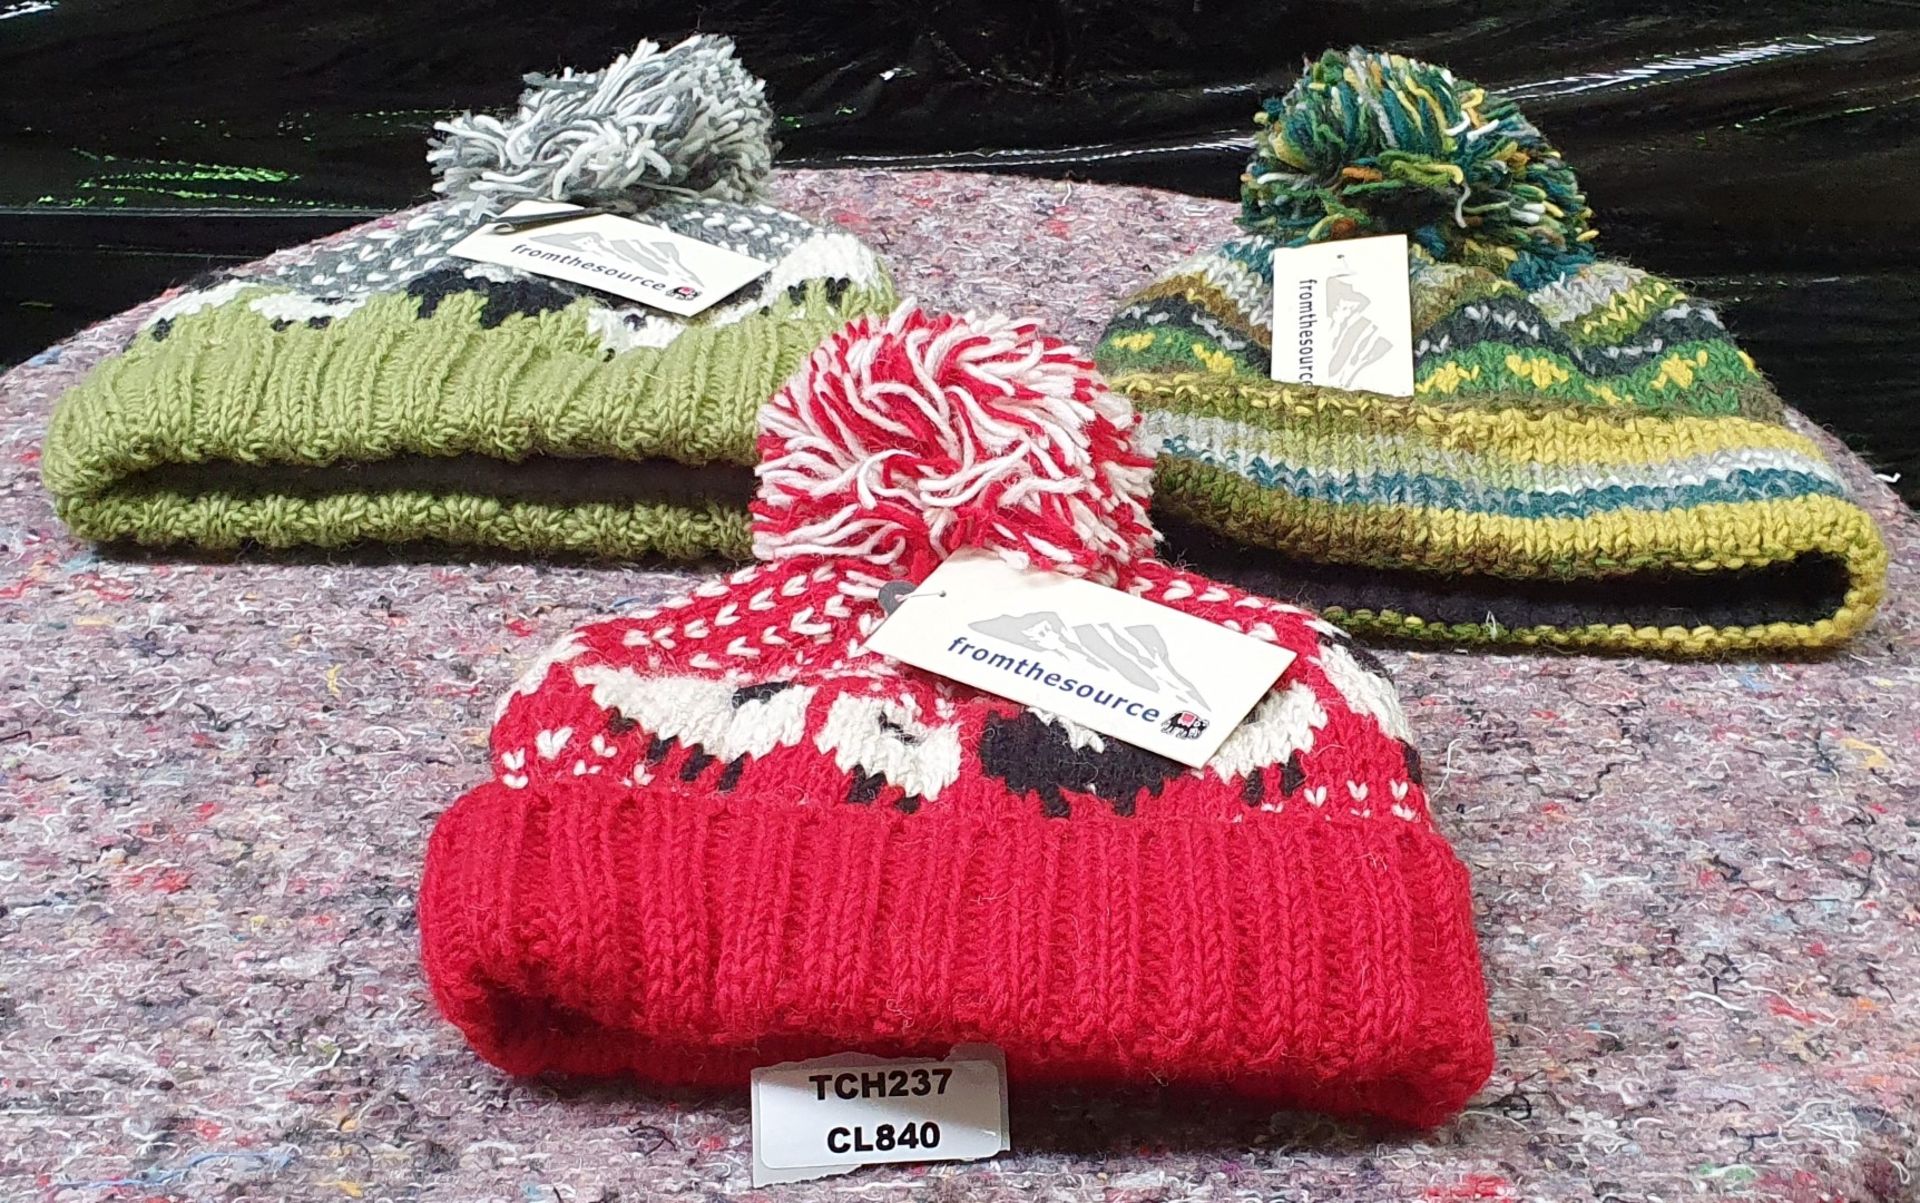 3 x Woolly Bobble Hats by From The Source - New Stock - RRP £49 - Ref: TCH237 - CL840 - Location: - Image 2 of 8